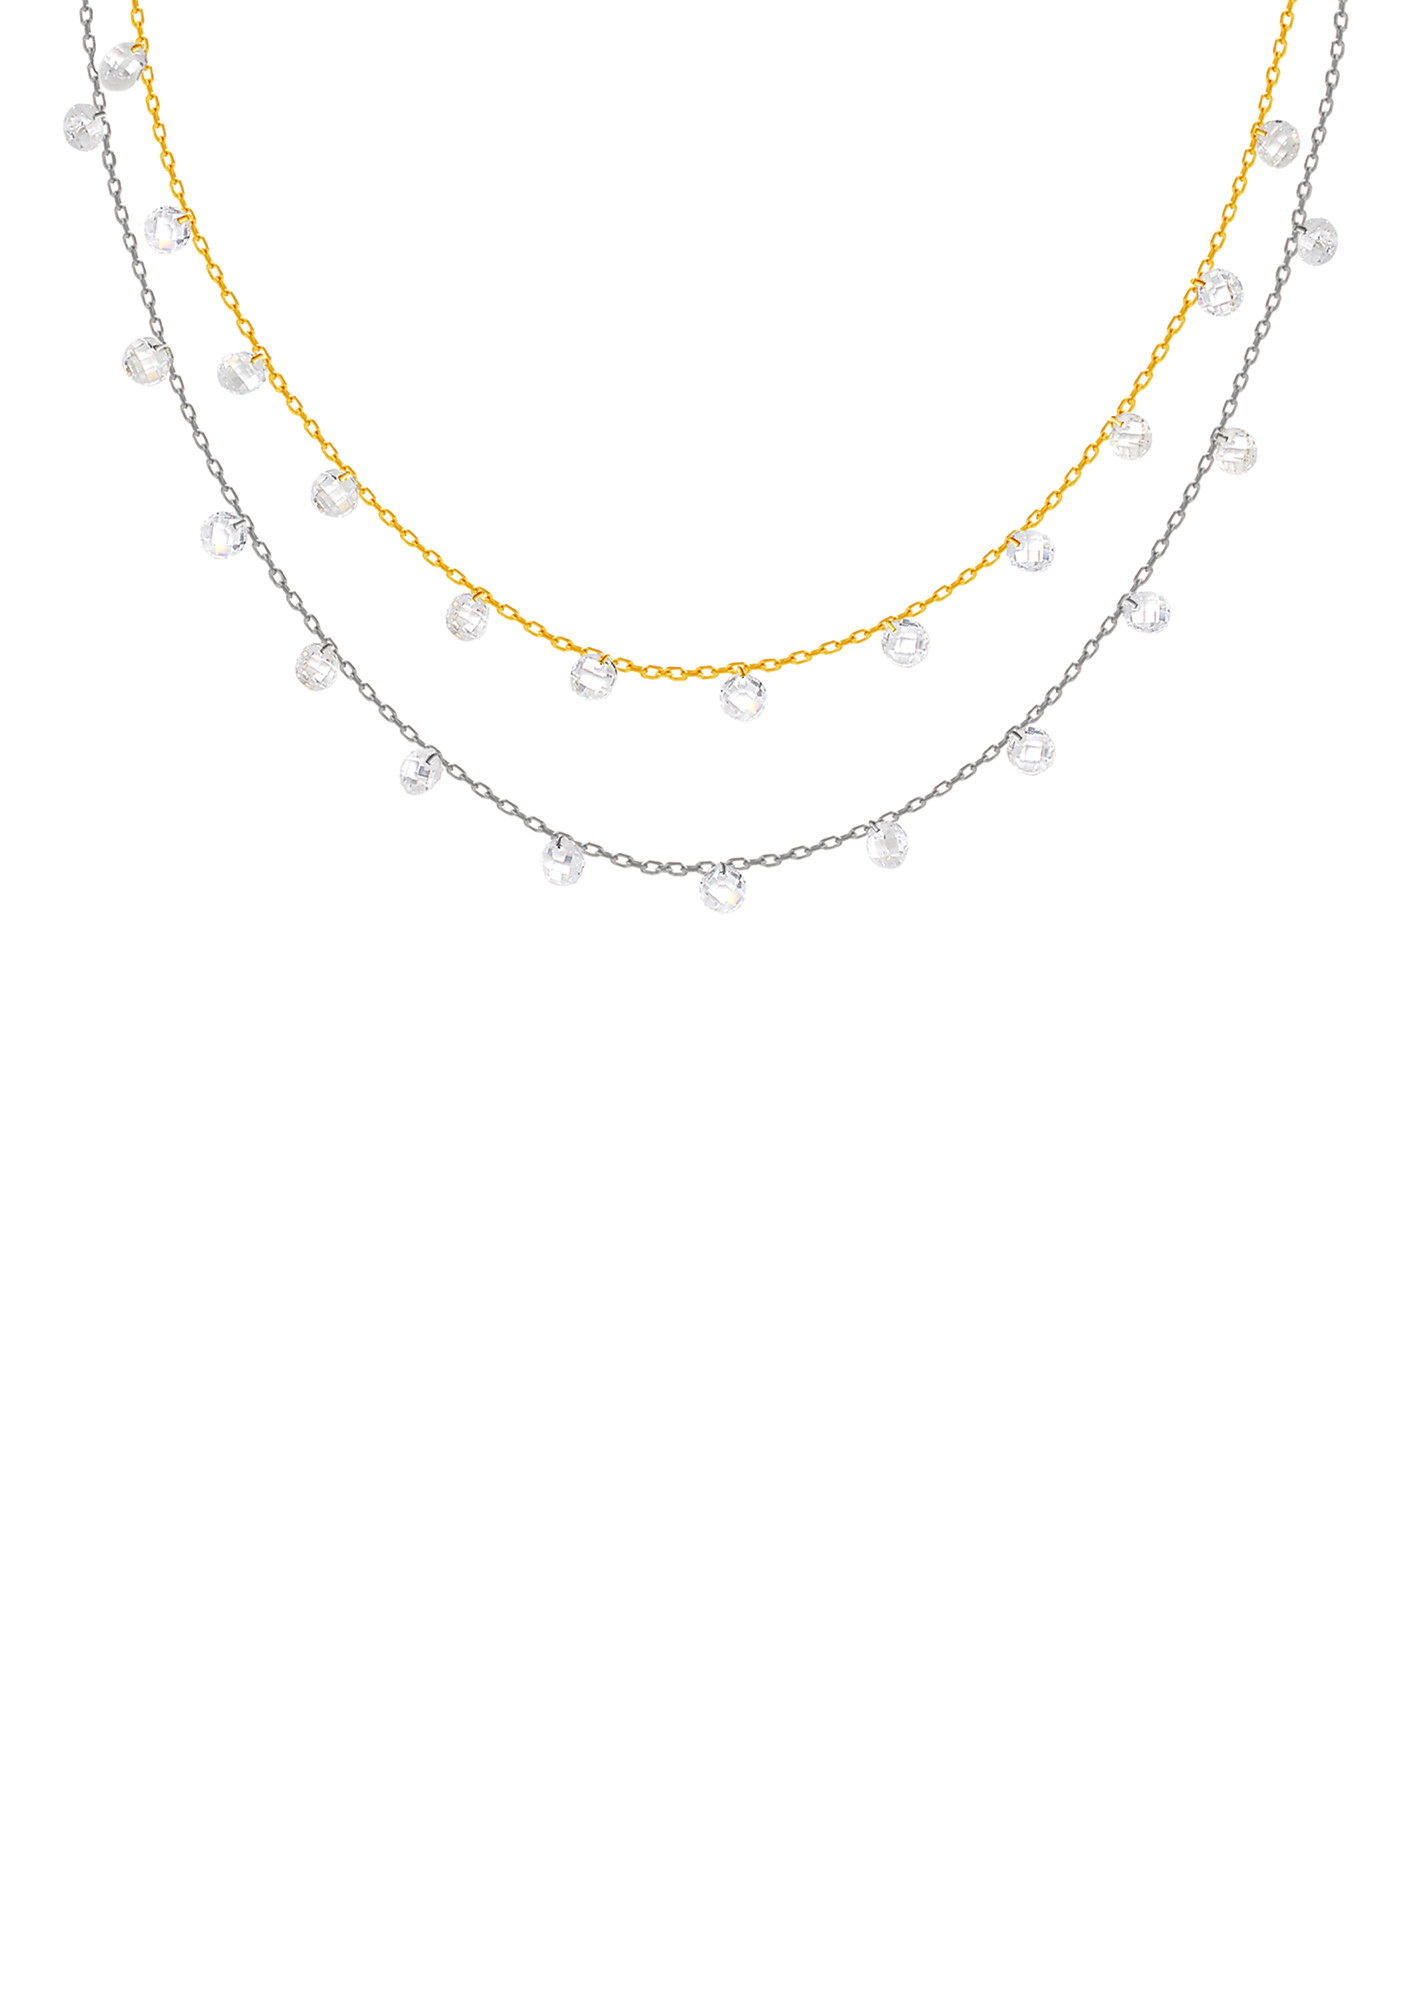 Silver Gold Layered Queens Necklace